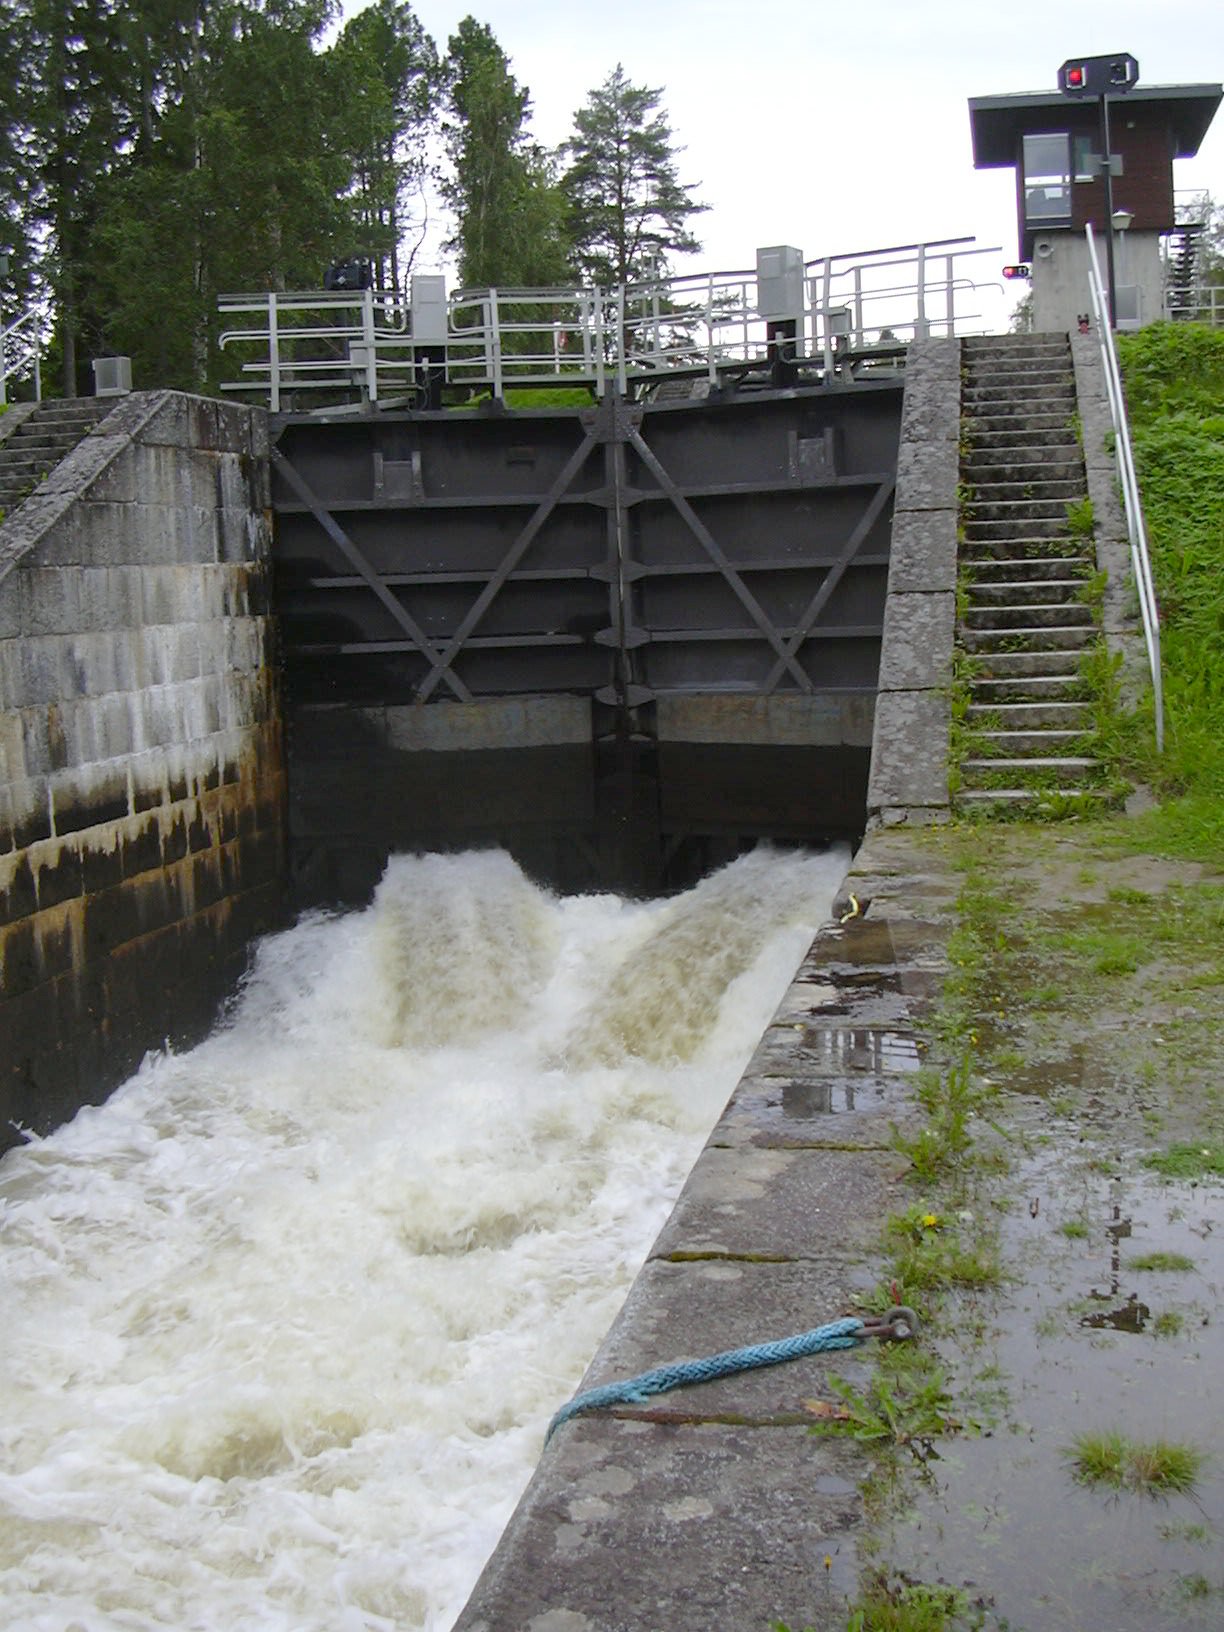 File:Lock gate in Varistaipale canal.jpg - Wikimedia Commons